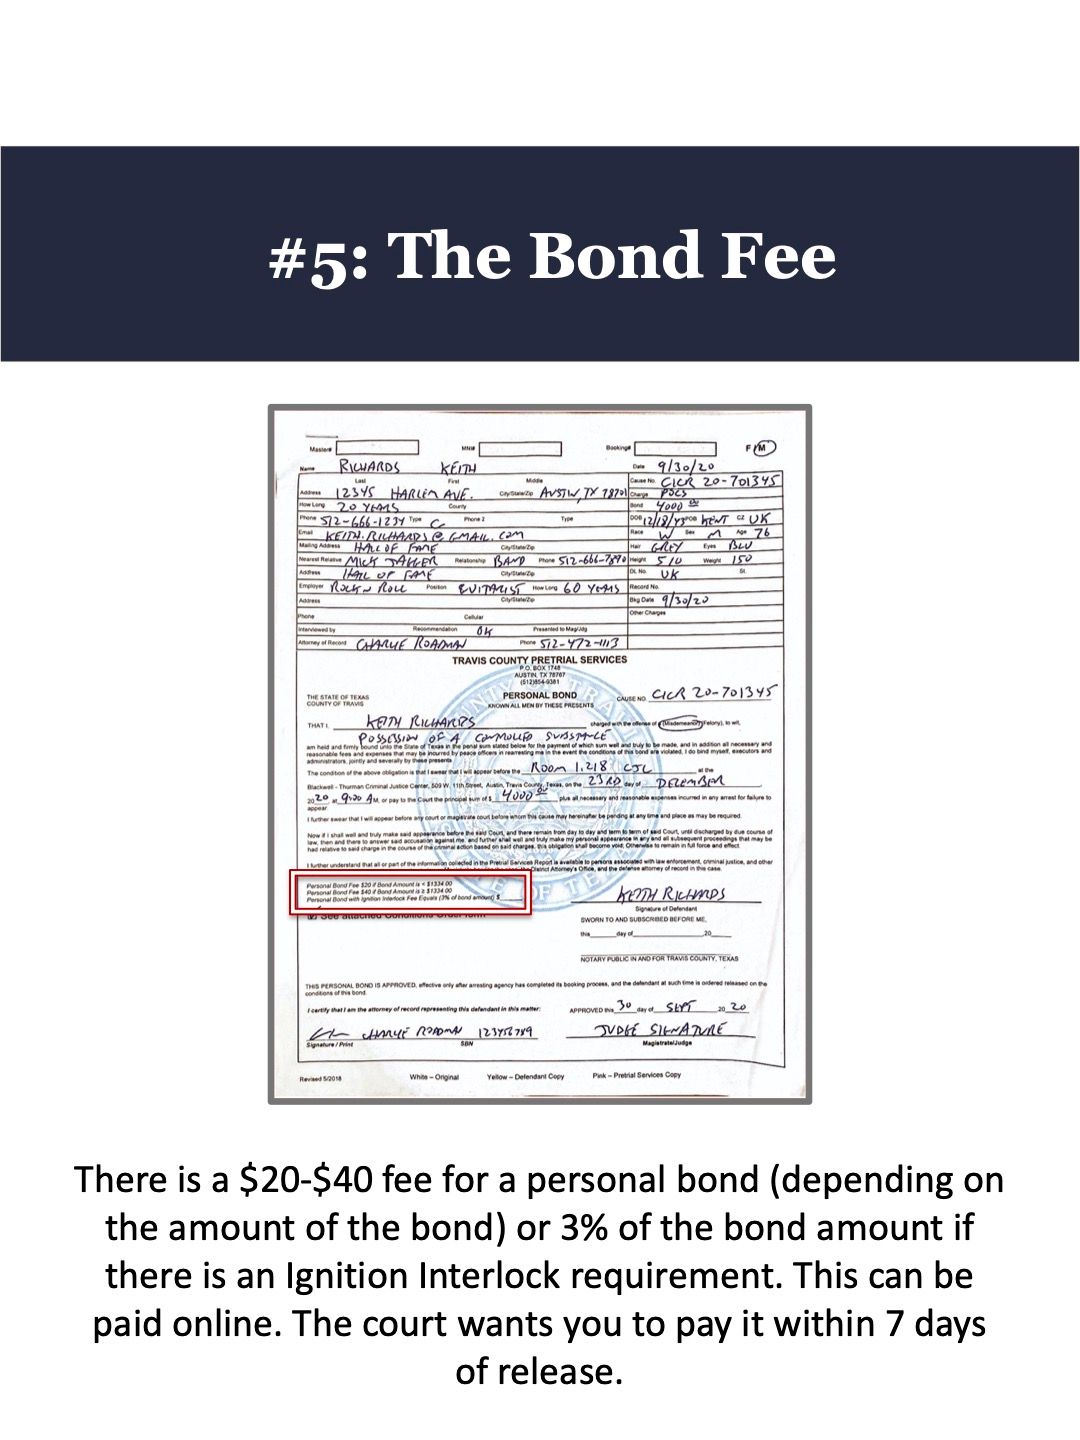 Personal Bond Guide page 6.jpg